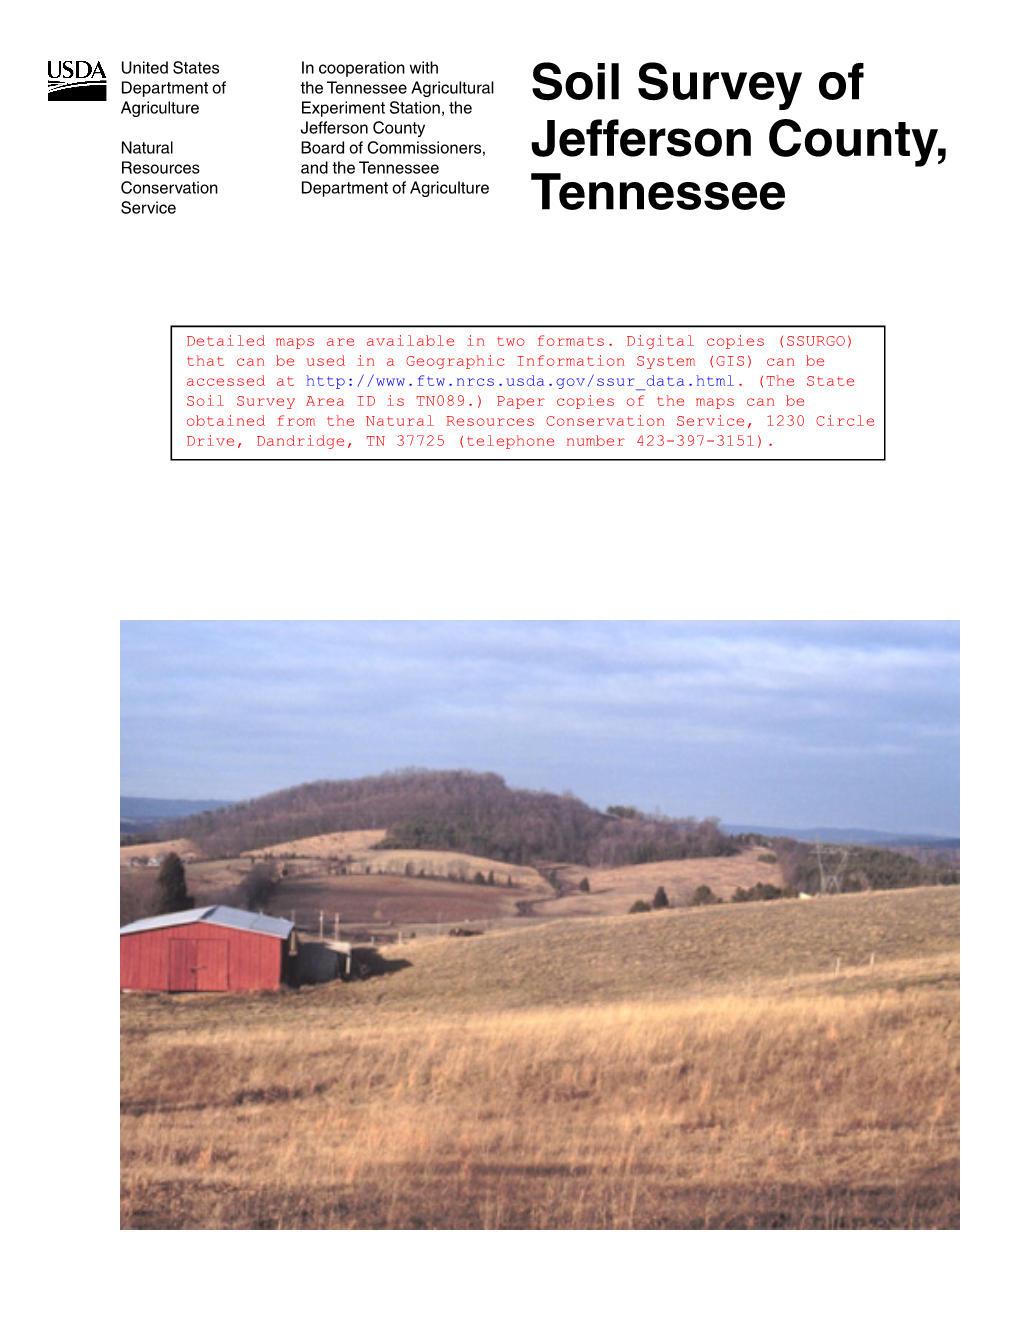 Soil Survey of Jefferson County, Tennessee